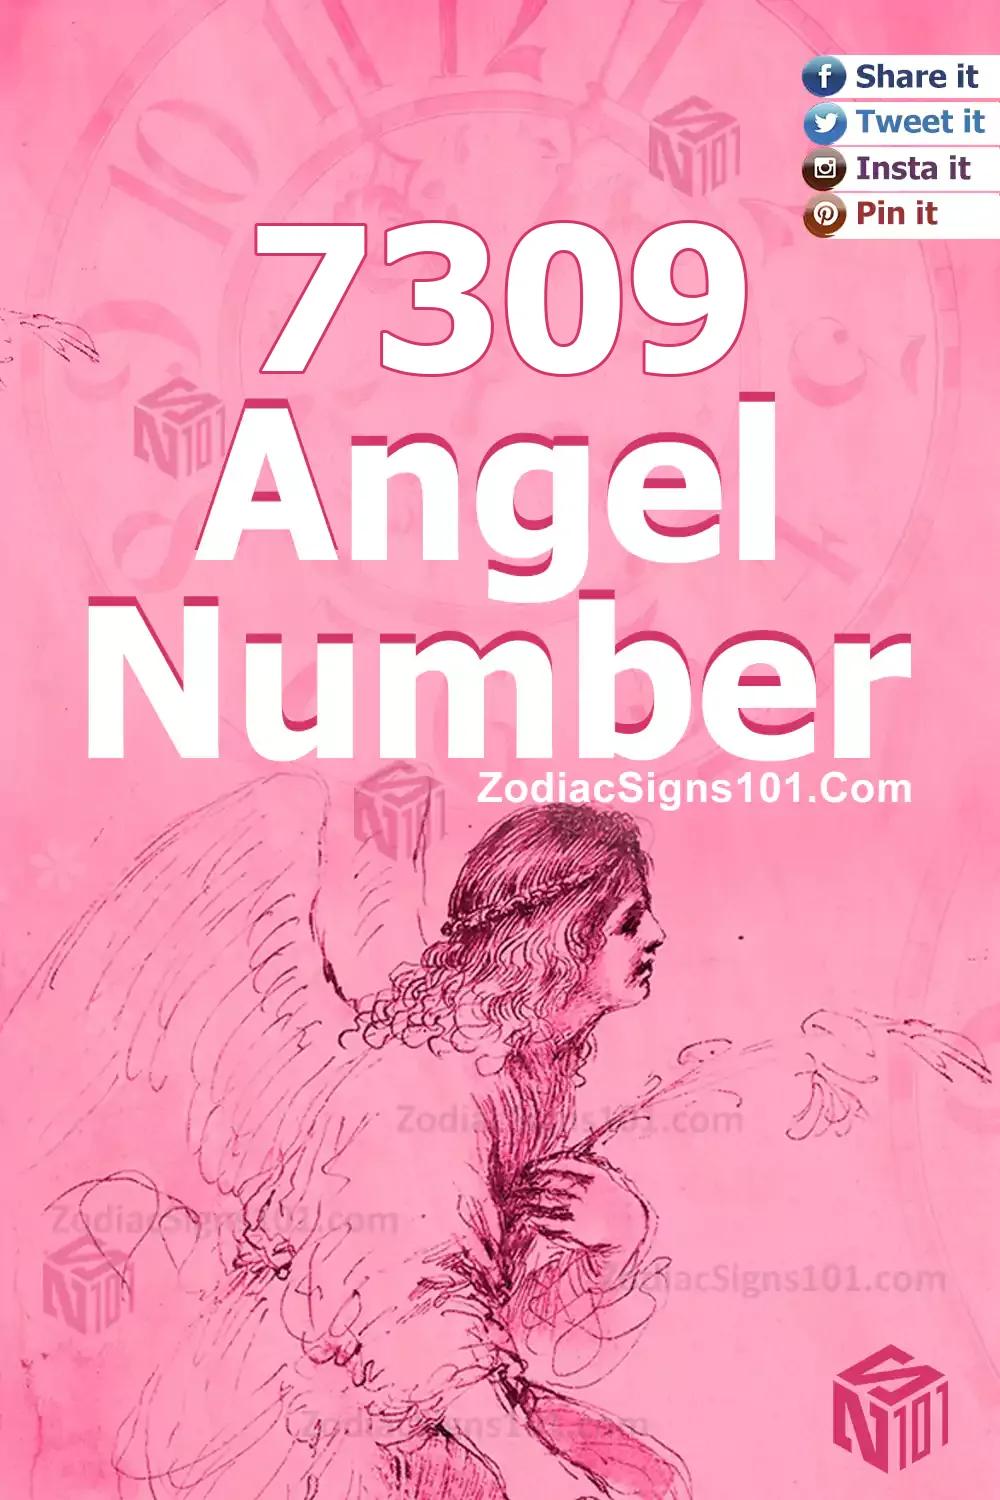 7309 Angel Number Meaning